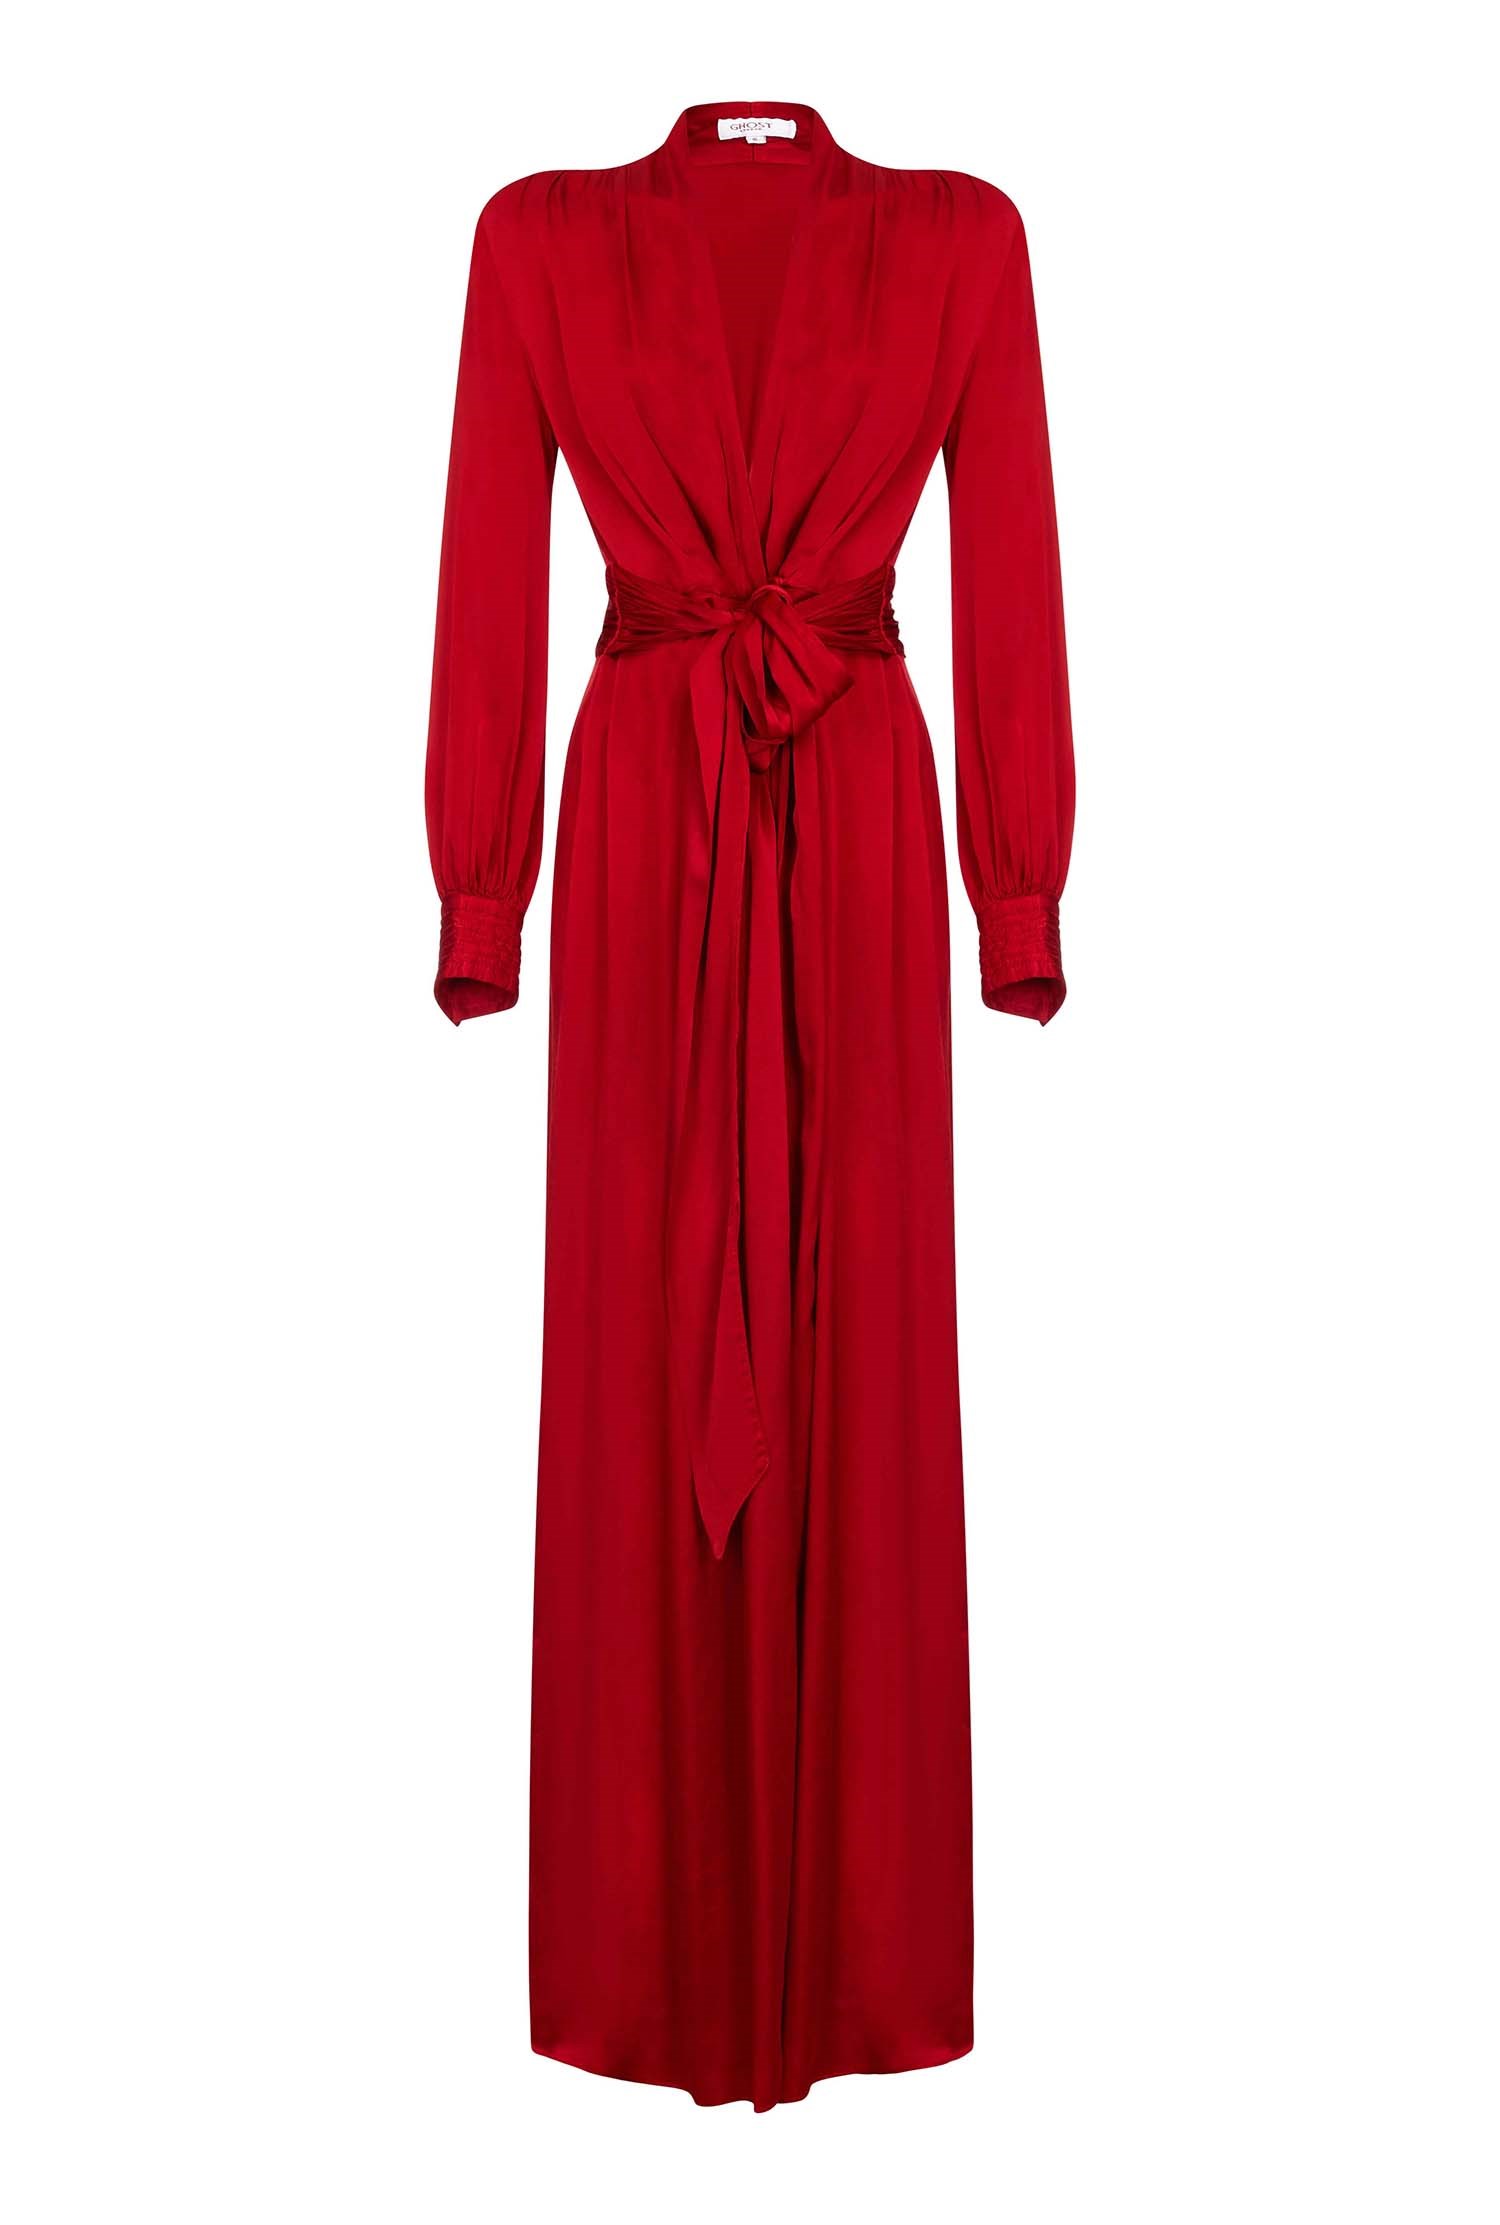 Becky Red Satin Maxi Dress with Long Sleeves | Ghost London